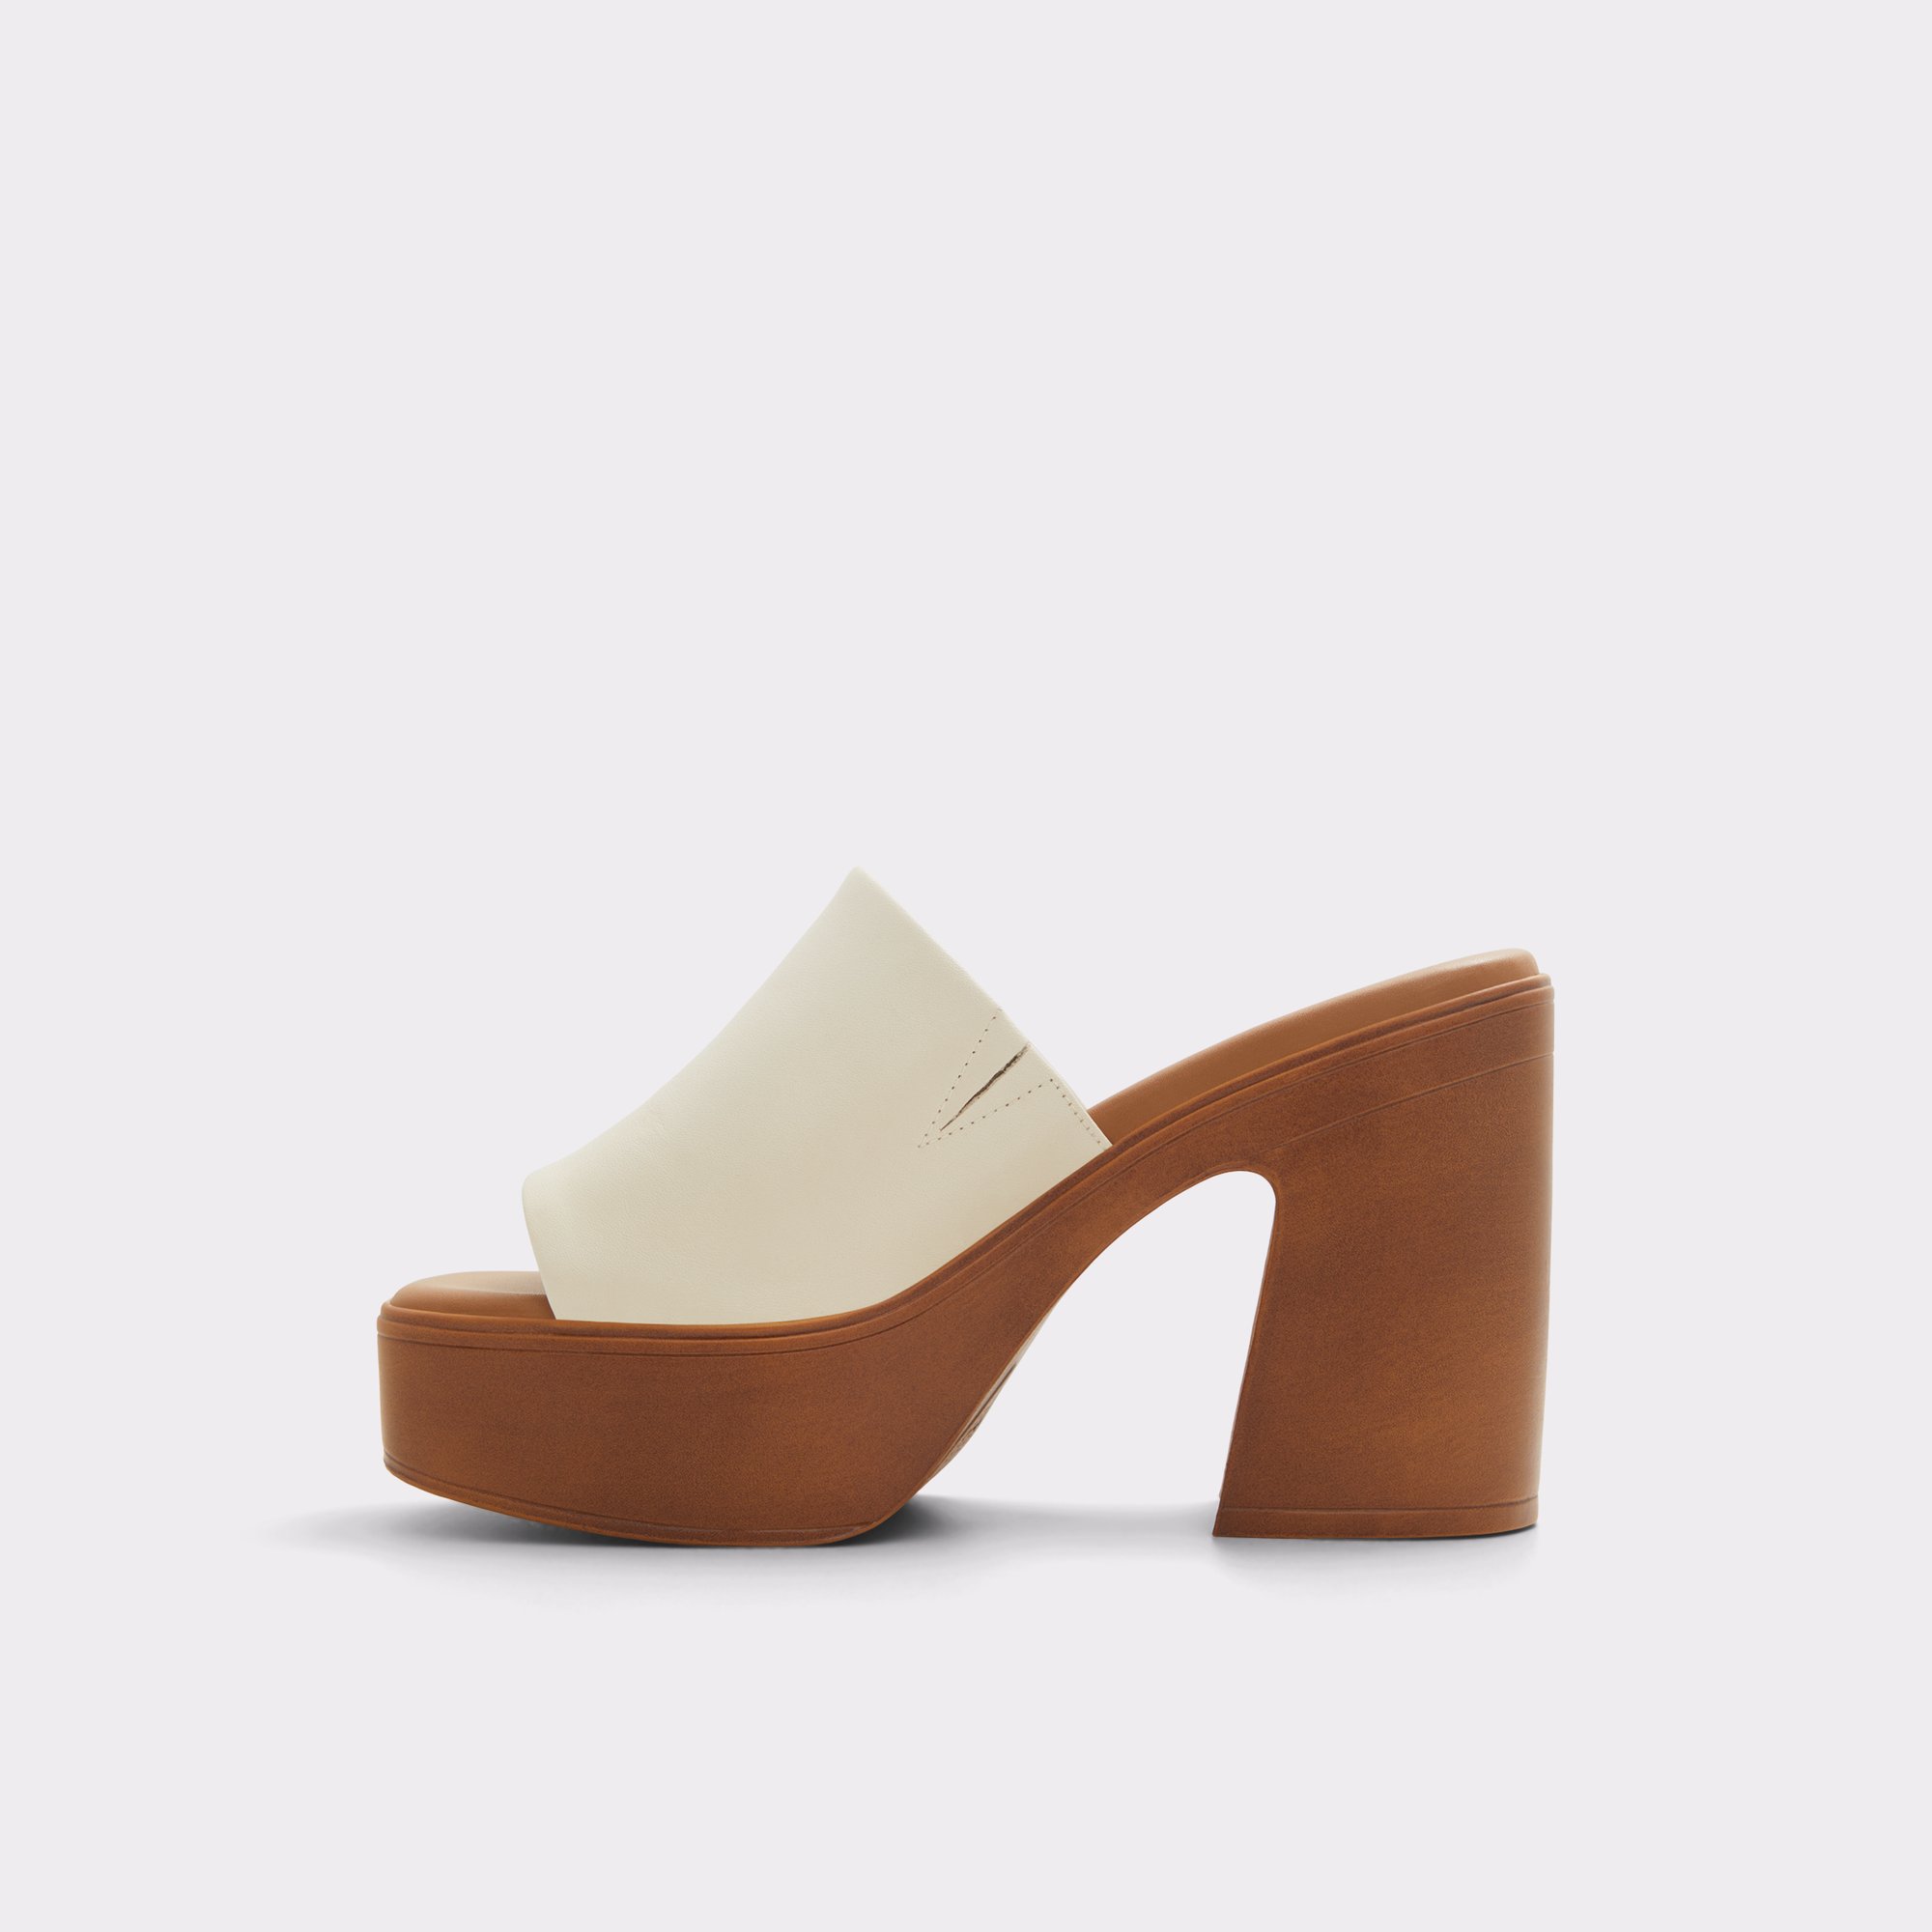 Maysee White Leather Smooth Women's Mule Shoes | ALDO US